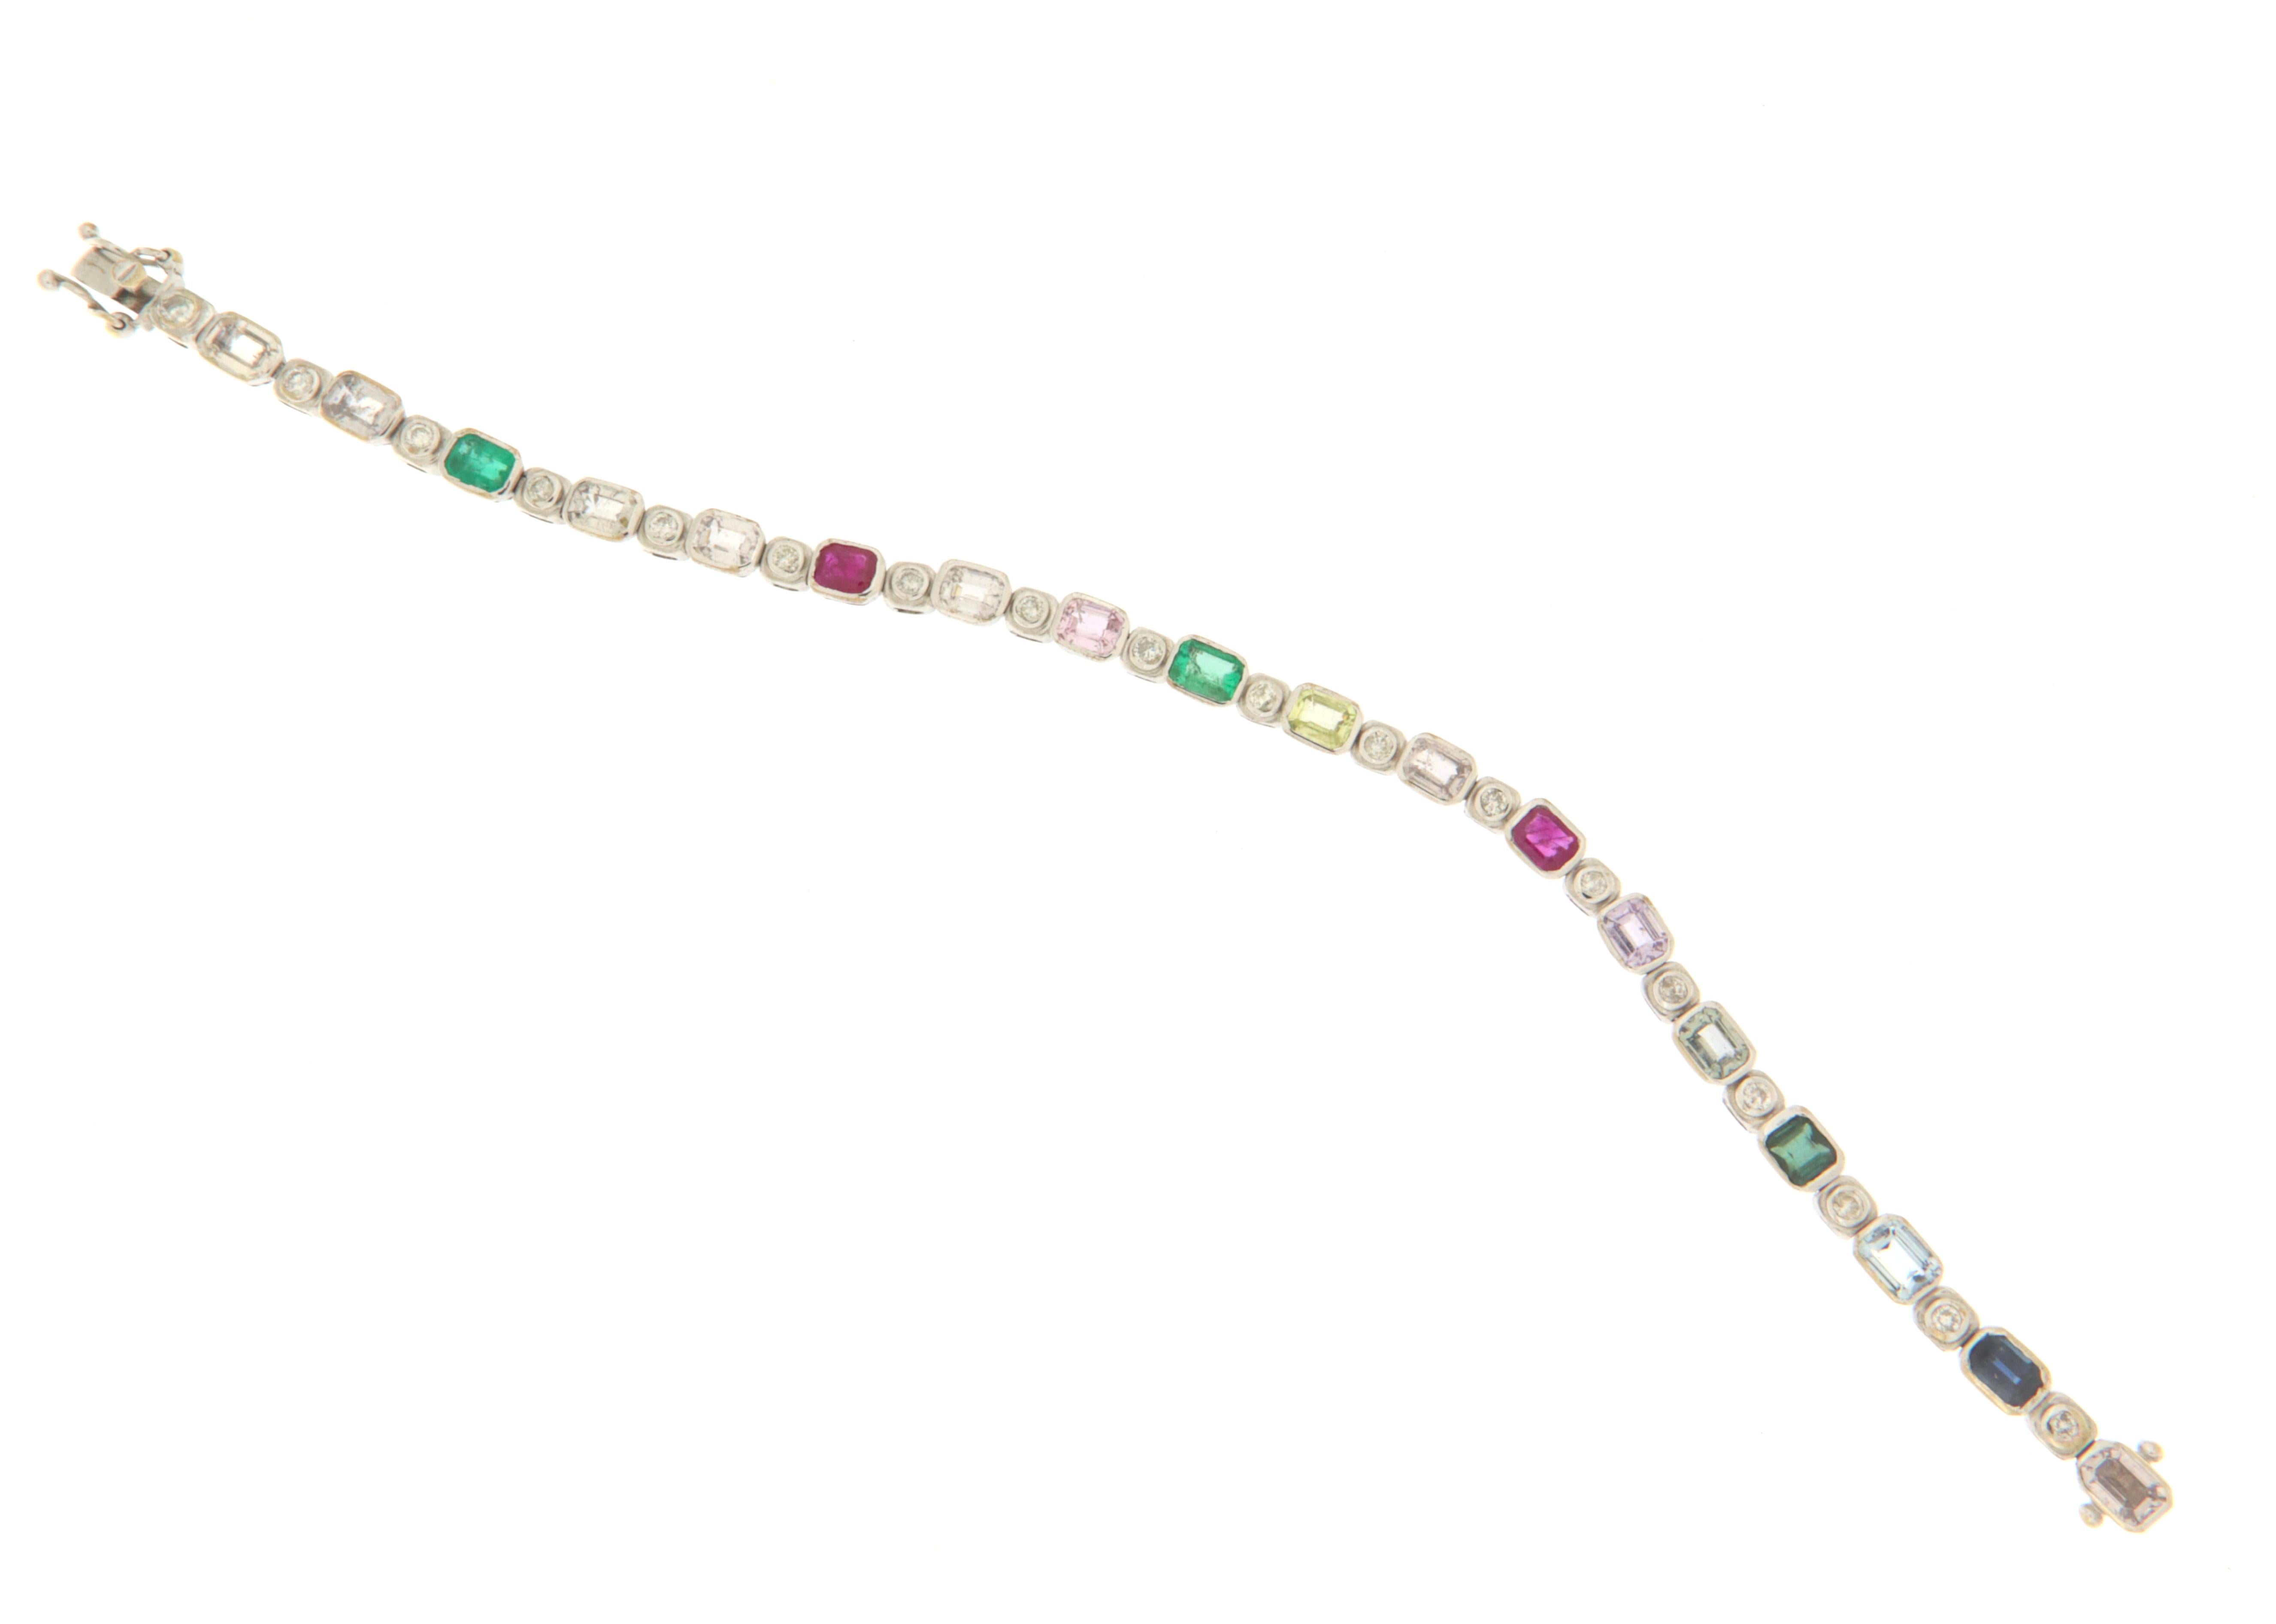 Tennis model bracelet made entirely by hand in 18 Karati white gold mounted with octagonal-cut sapphires, rubies and emeralds and round-cut diamonds.
An explosion of colors suitable for a woman's wrist but also for a man.

Total weight of the